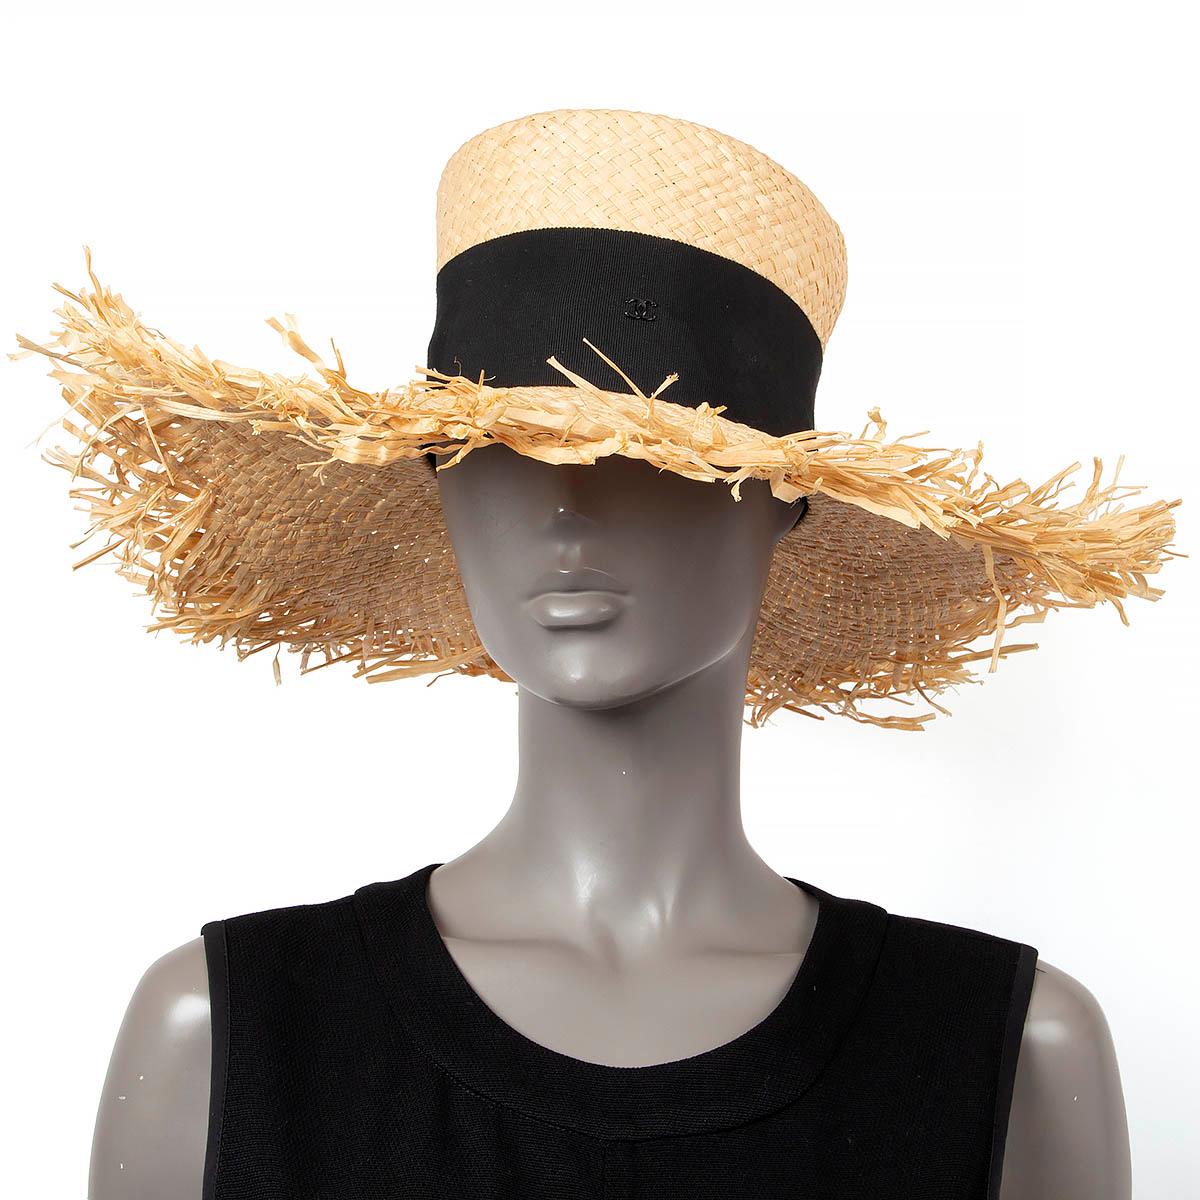 100% authentic Chanel wide brim beige raffia hat with black grosgrain band and CC logo. Has been worn and is in excellent condition. 

2019 Spring/Summer

Measurements
Model	Chanel19S AA0410
Tag Size	S
Inside Circumference	53cm (20.7in)

All our